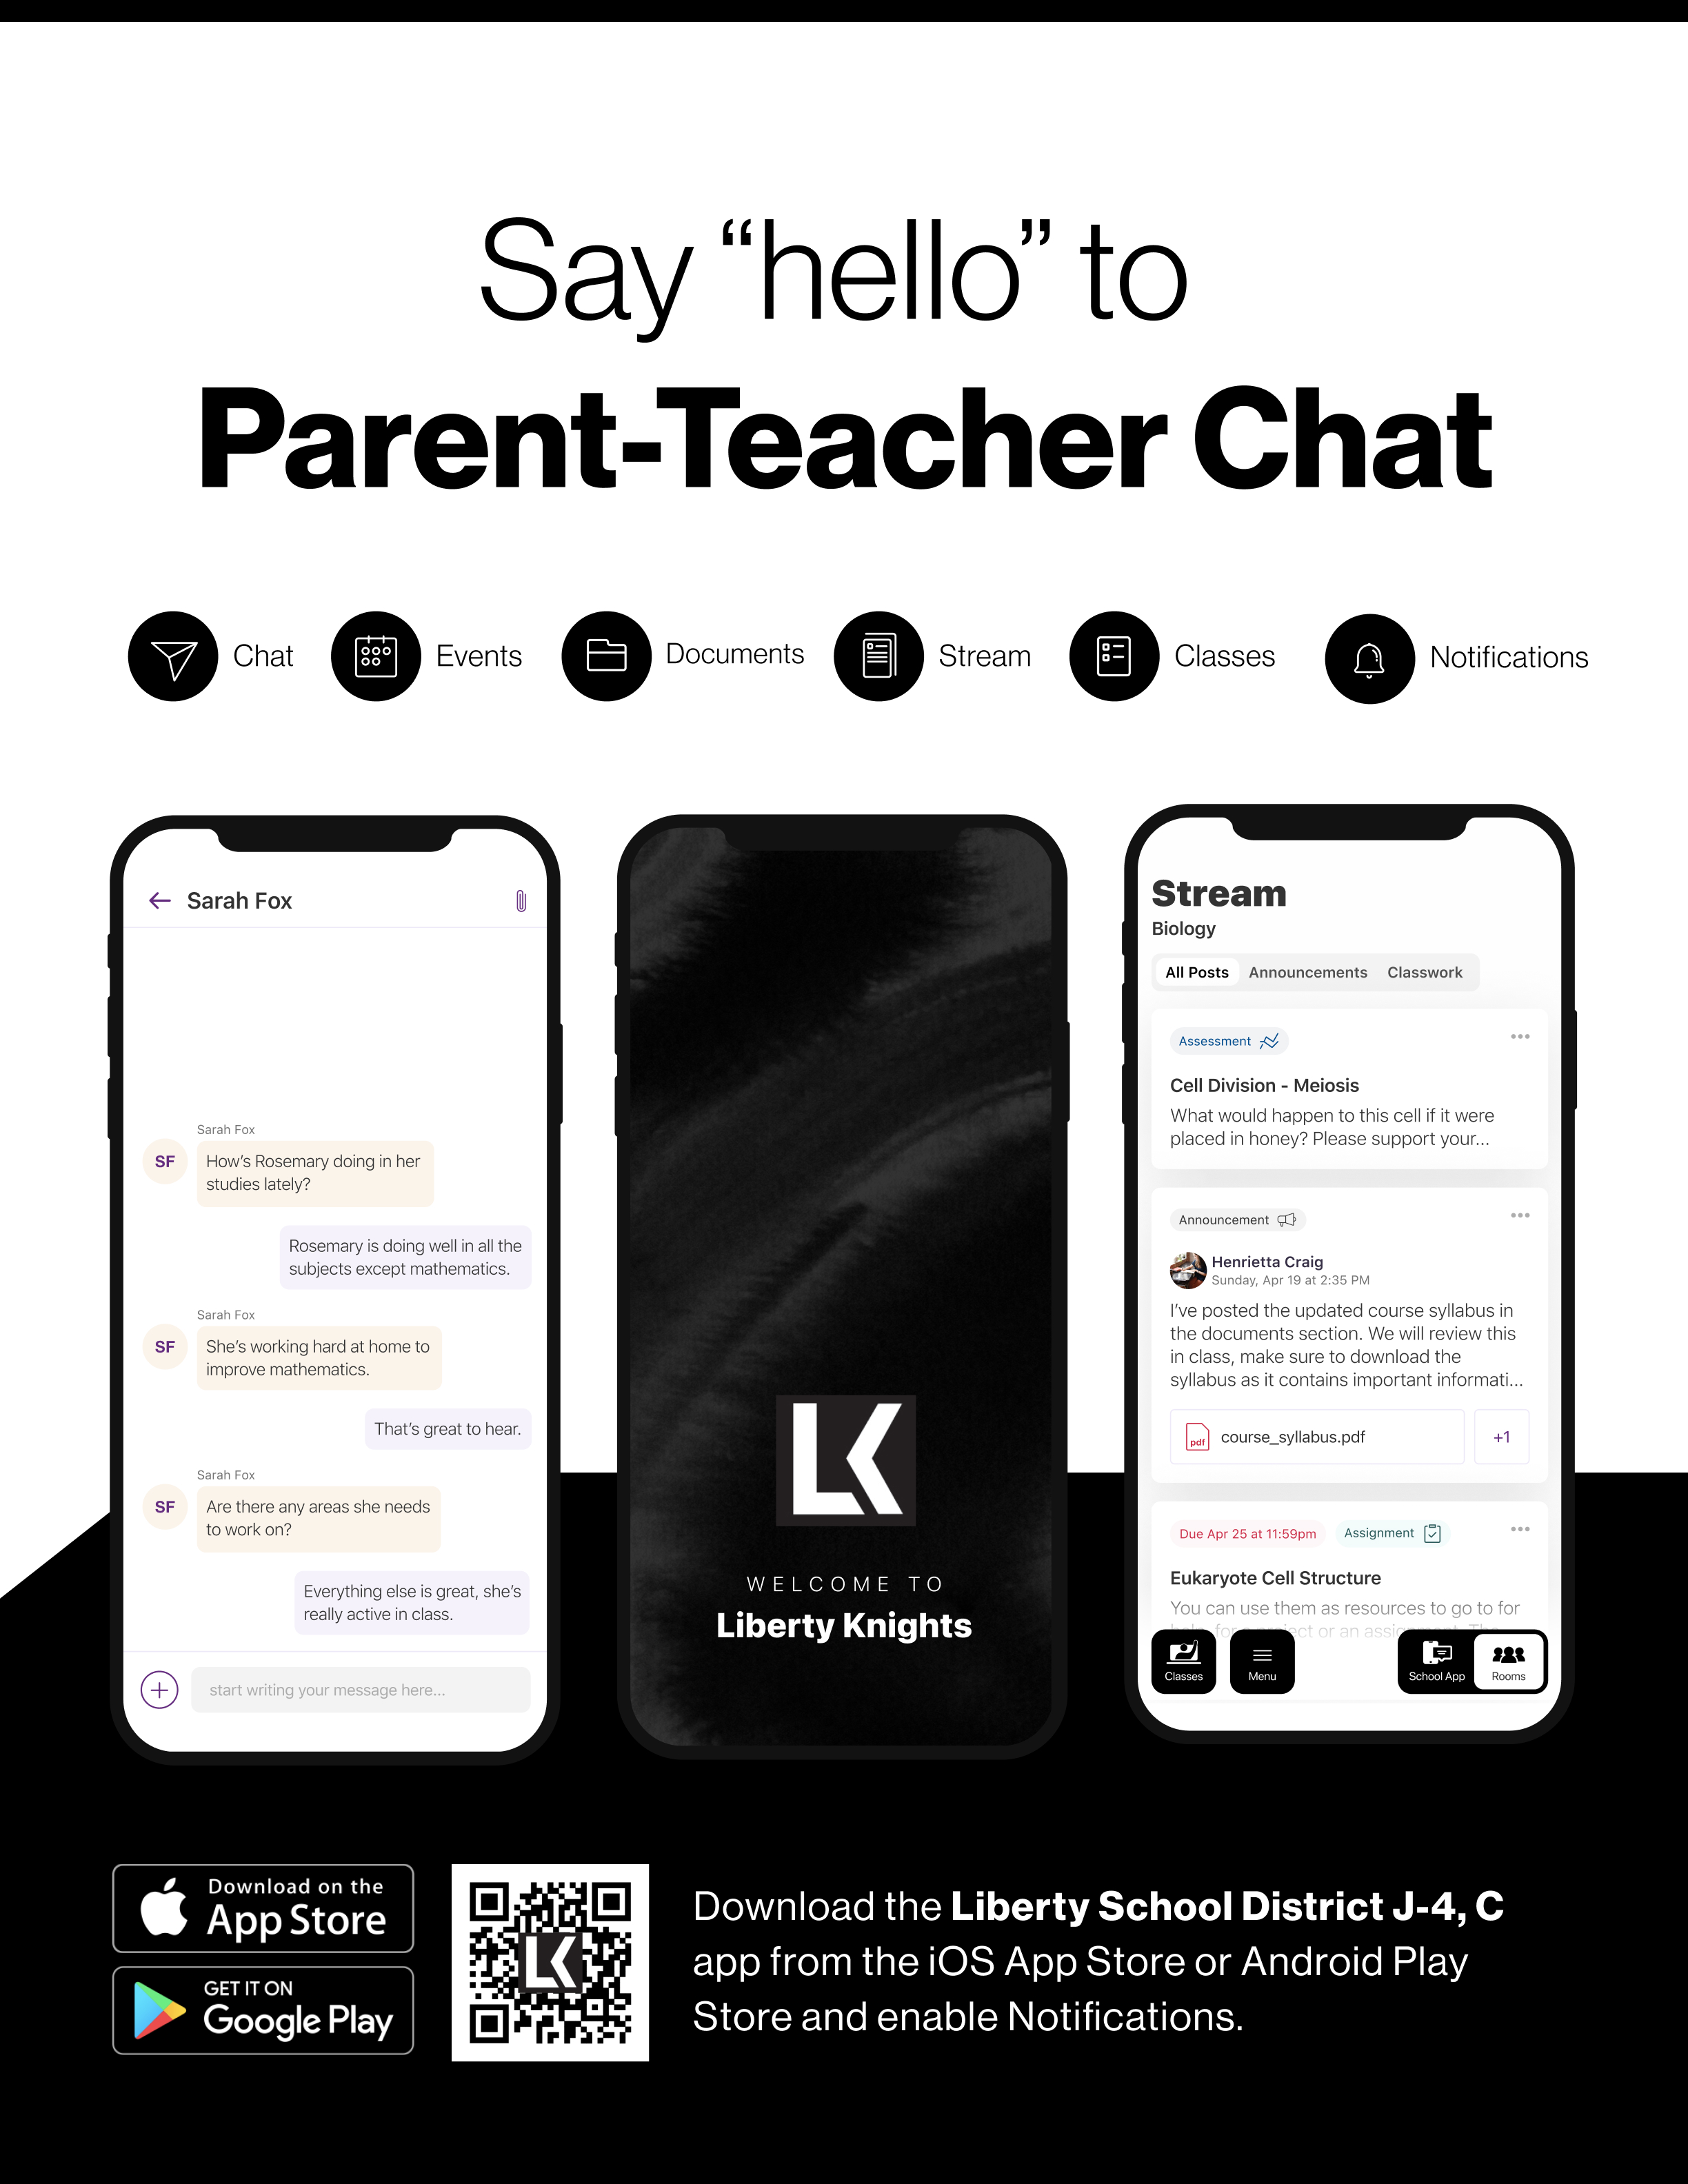 Say hello to Parent-Teacher chat in the new Rooms app. Download the Liberty School District J-4 app in the Google Play or Apple App store.